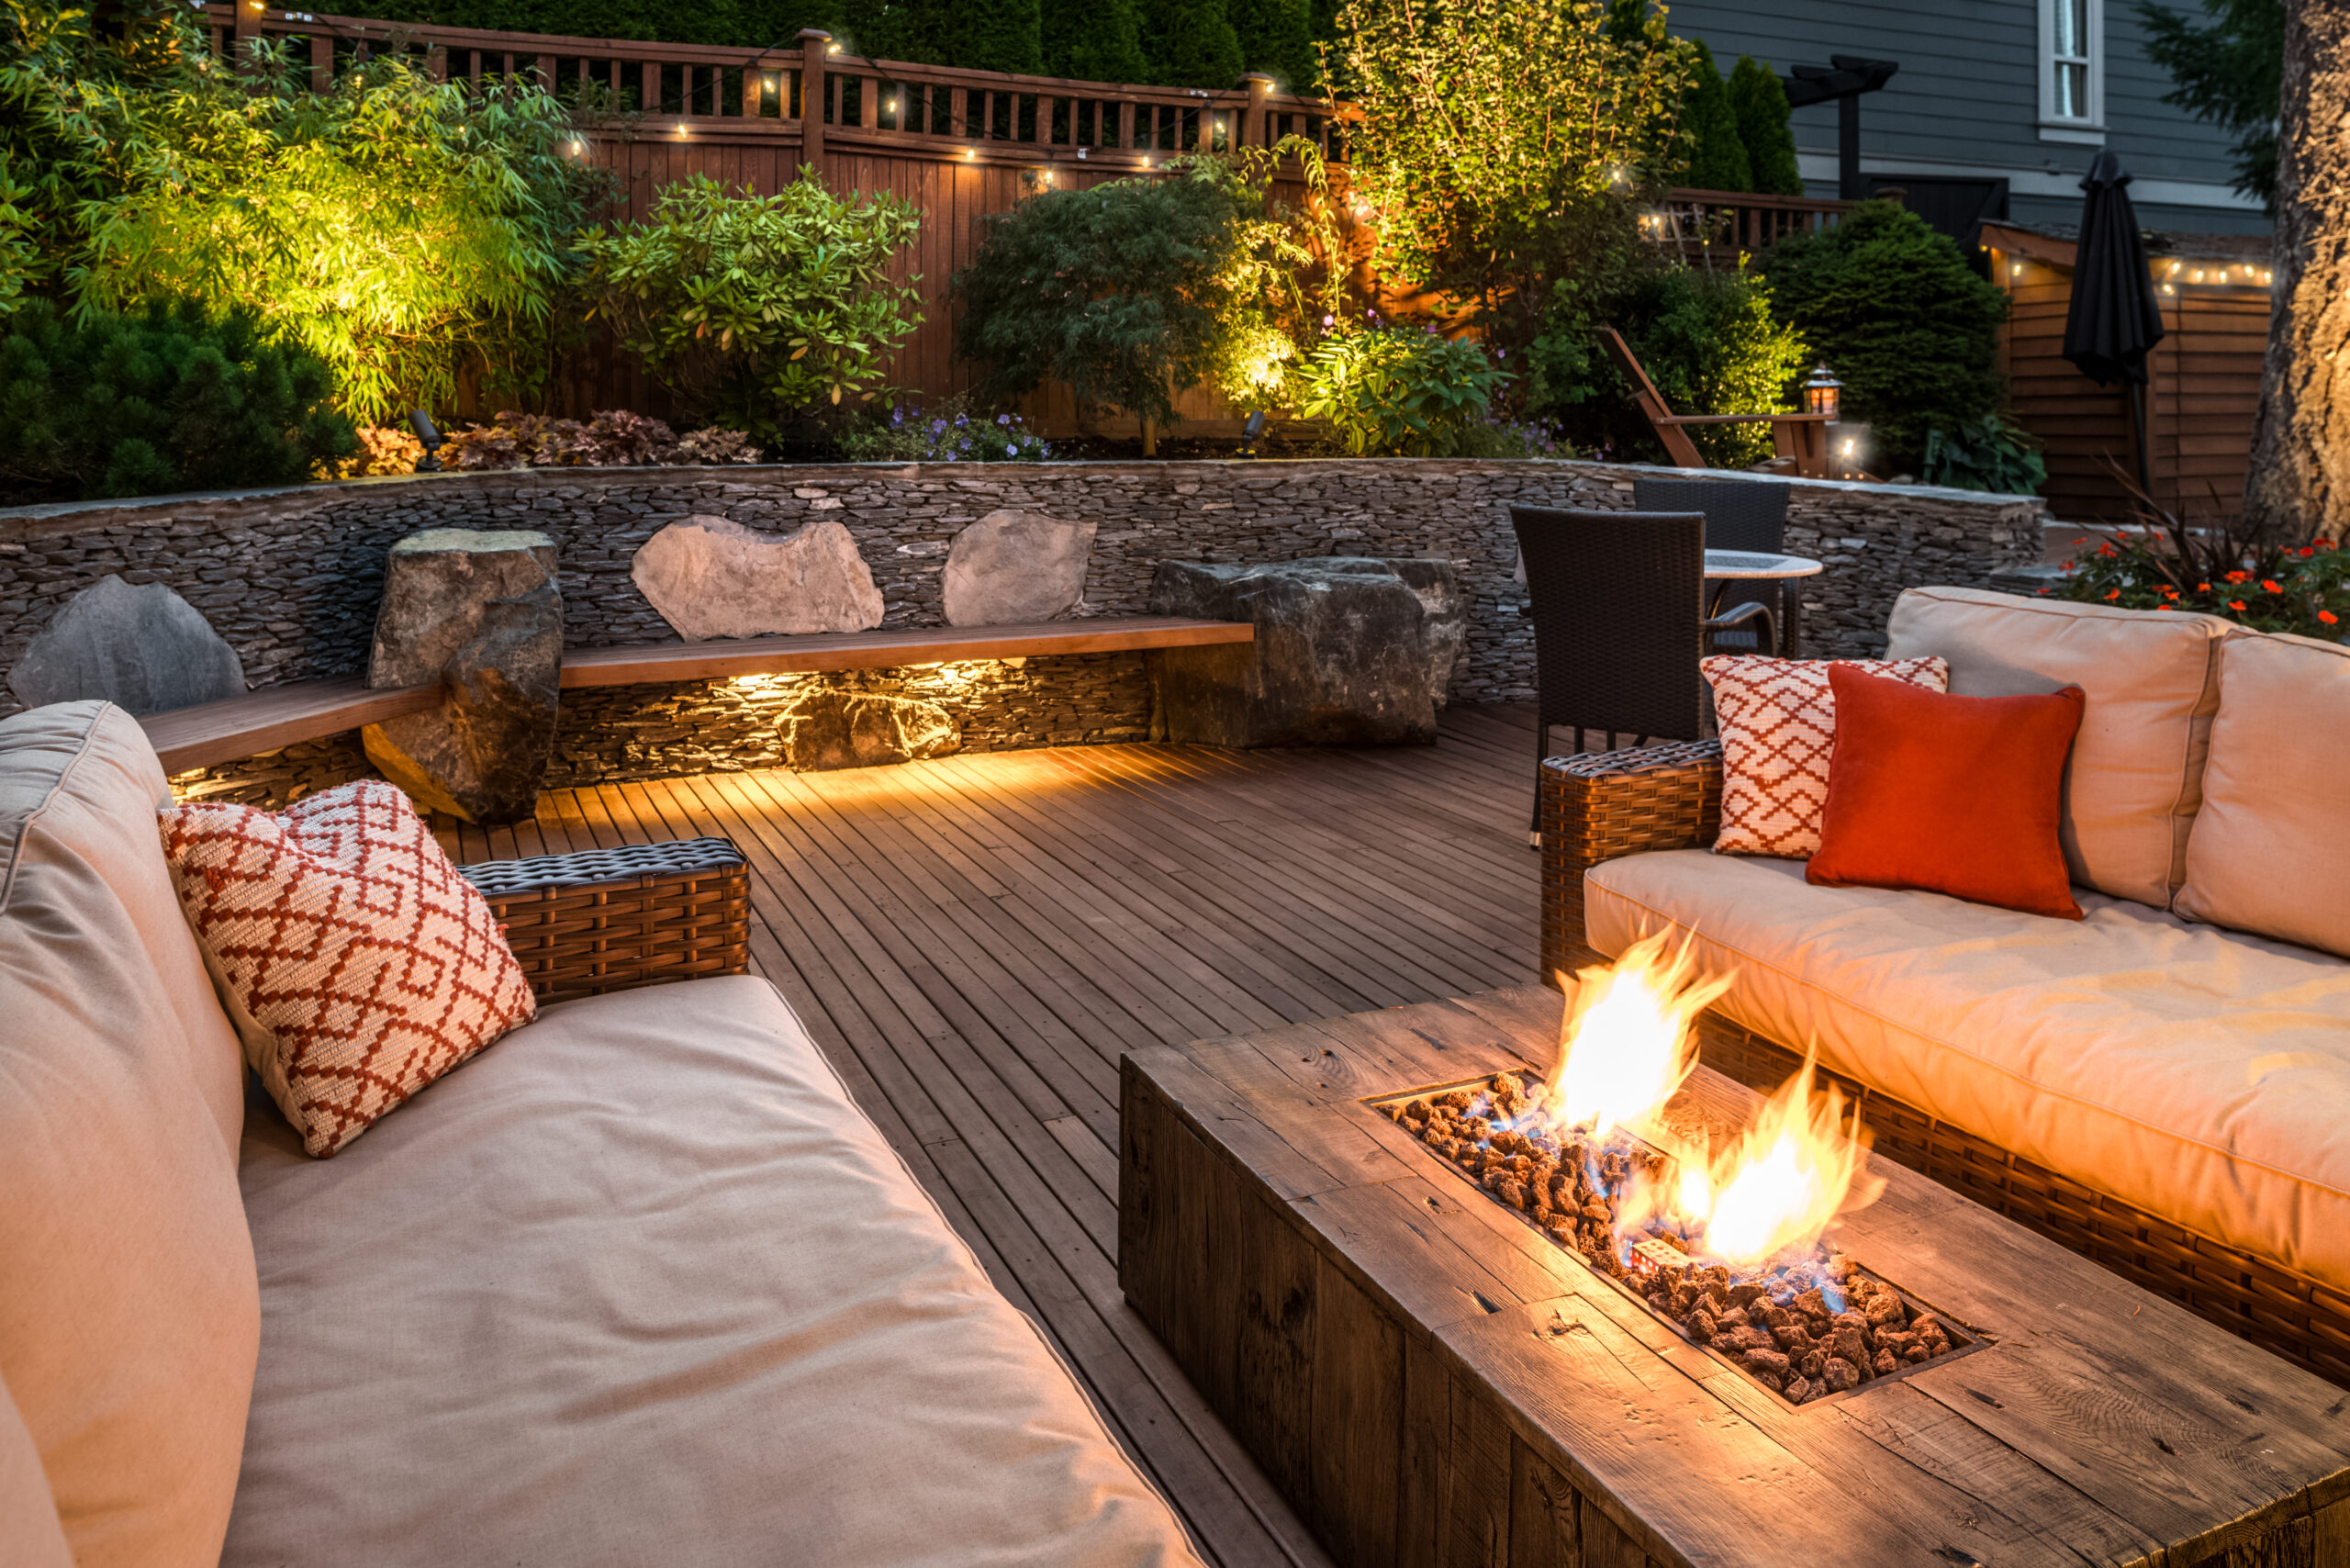 A cozy backyard retreat with a stone wall, two couches, and a fire pit